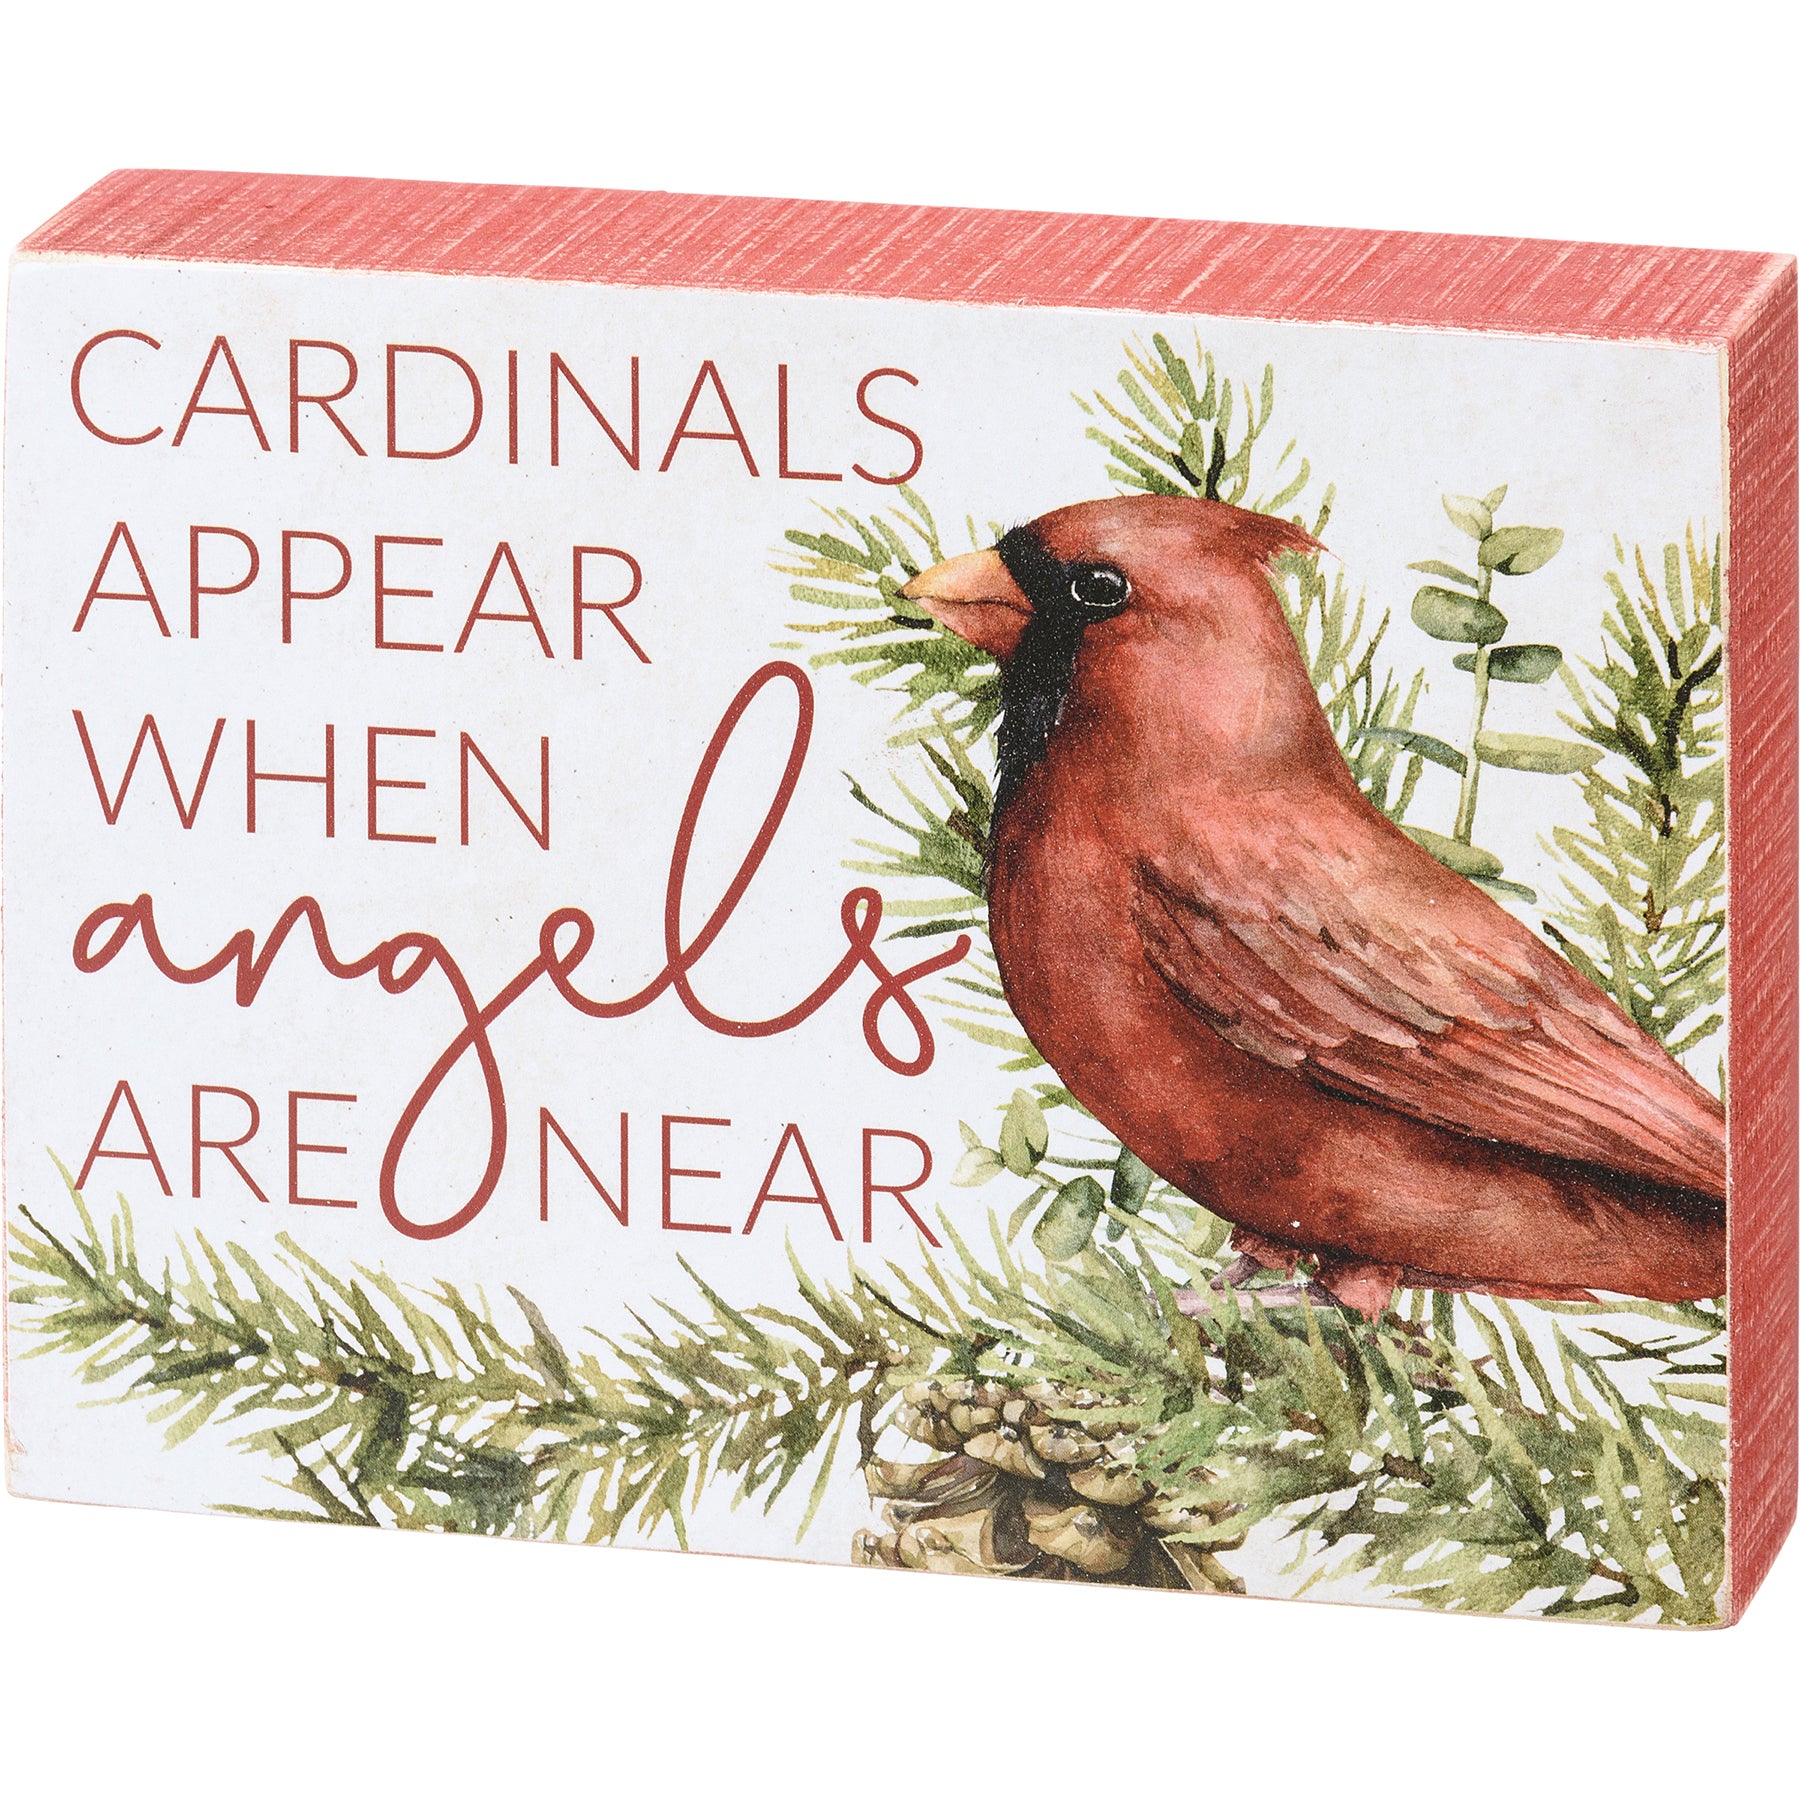 'Cardinals Appear When Angels Are Near' Box Sign